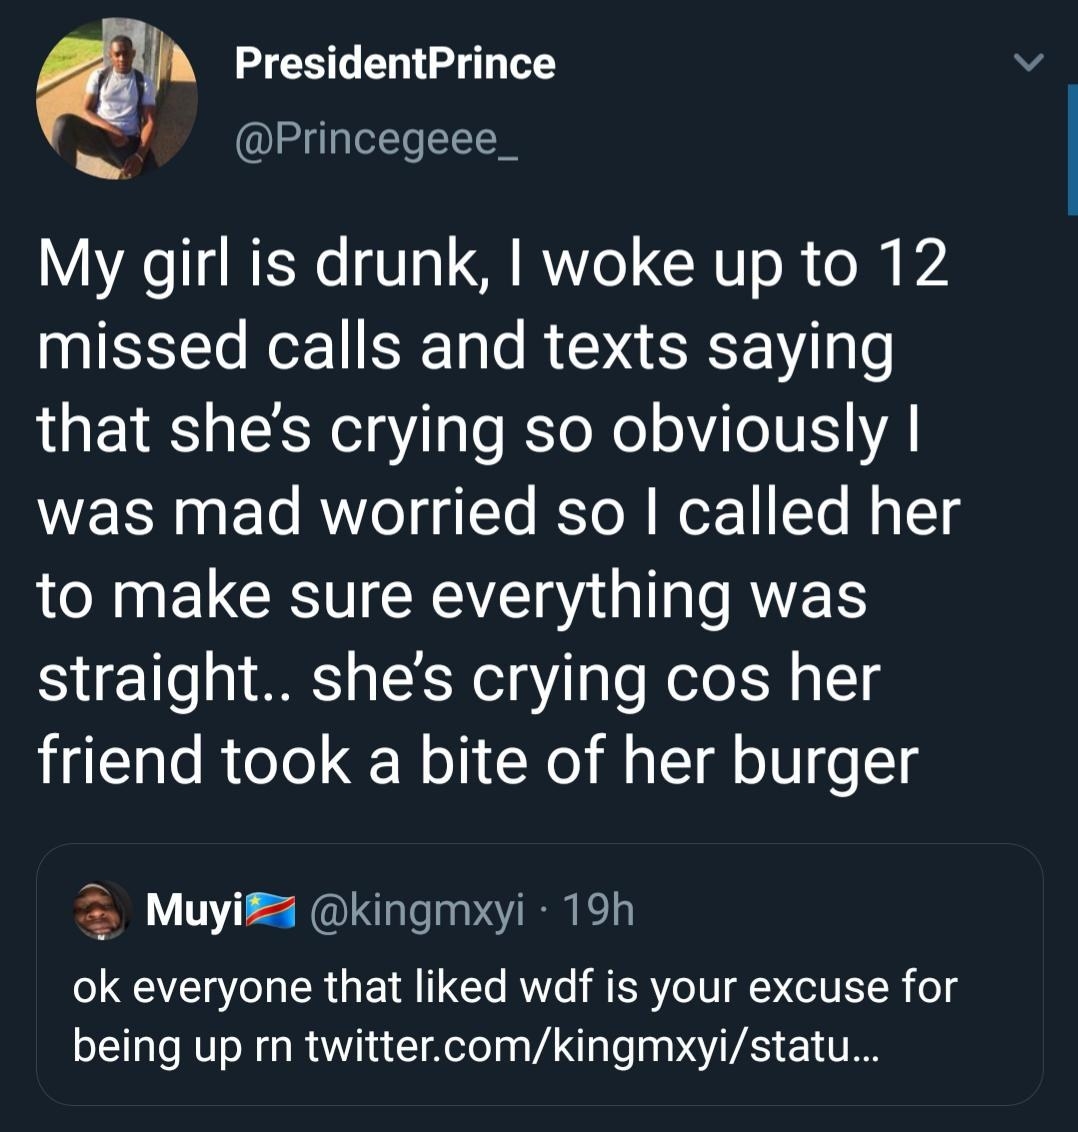 Tweet reading, &quot;My girl is drunk. I woke up to 12 missed calls and texts saying that she’s crying so obviously I was mad worried so I called her to make sure everything was straight. She’s crying cos her friend took a bite of her burger&quot;